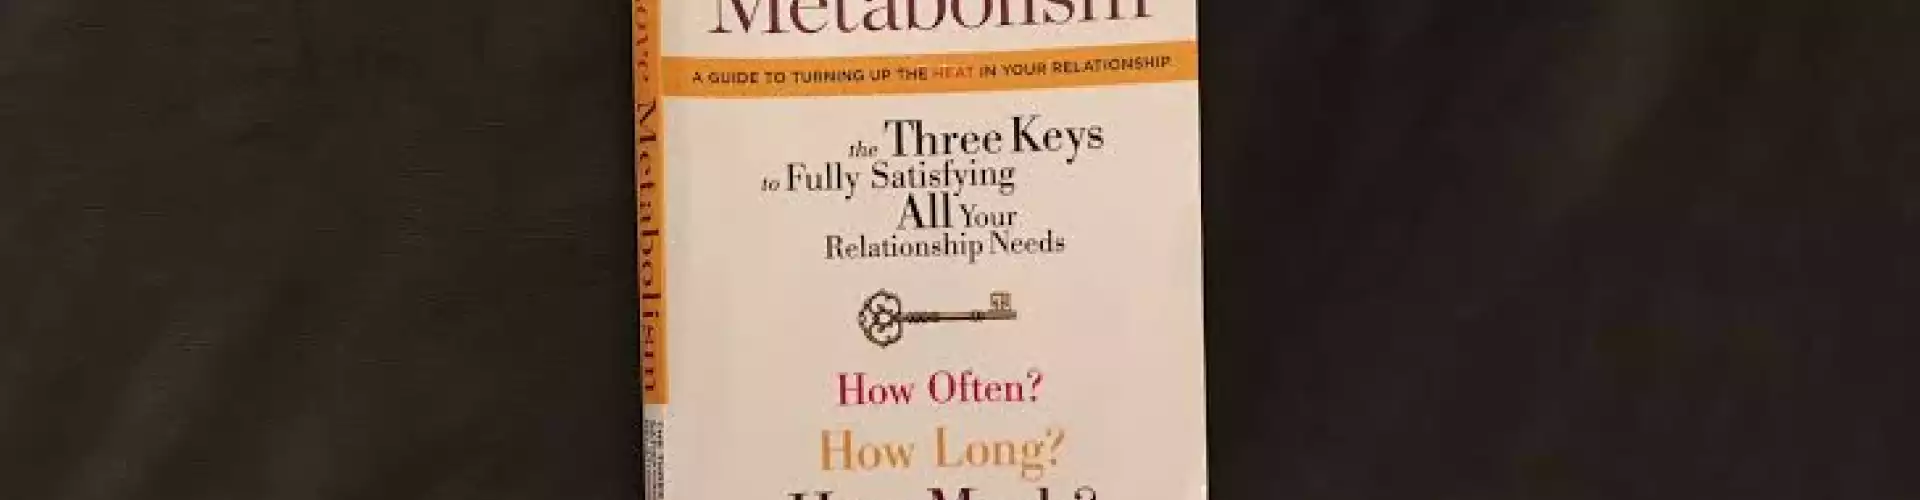 Intro to Love Metabolism- A Guide to Turning Up the Heat in Your Relationship